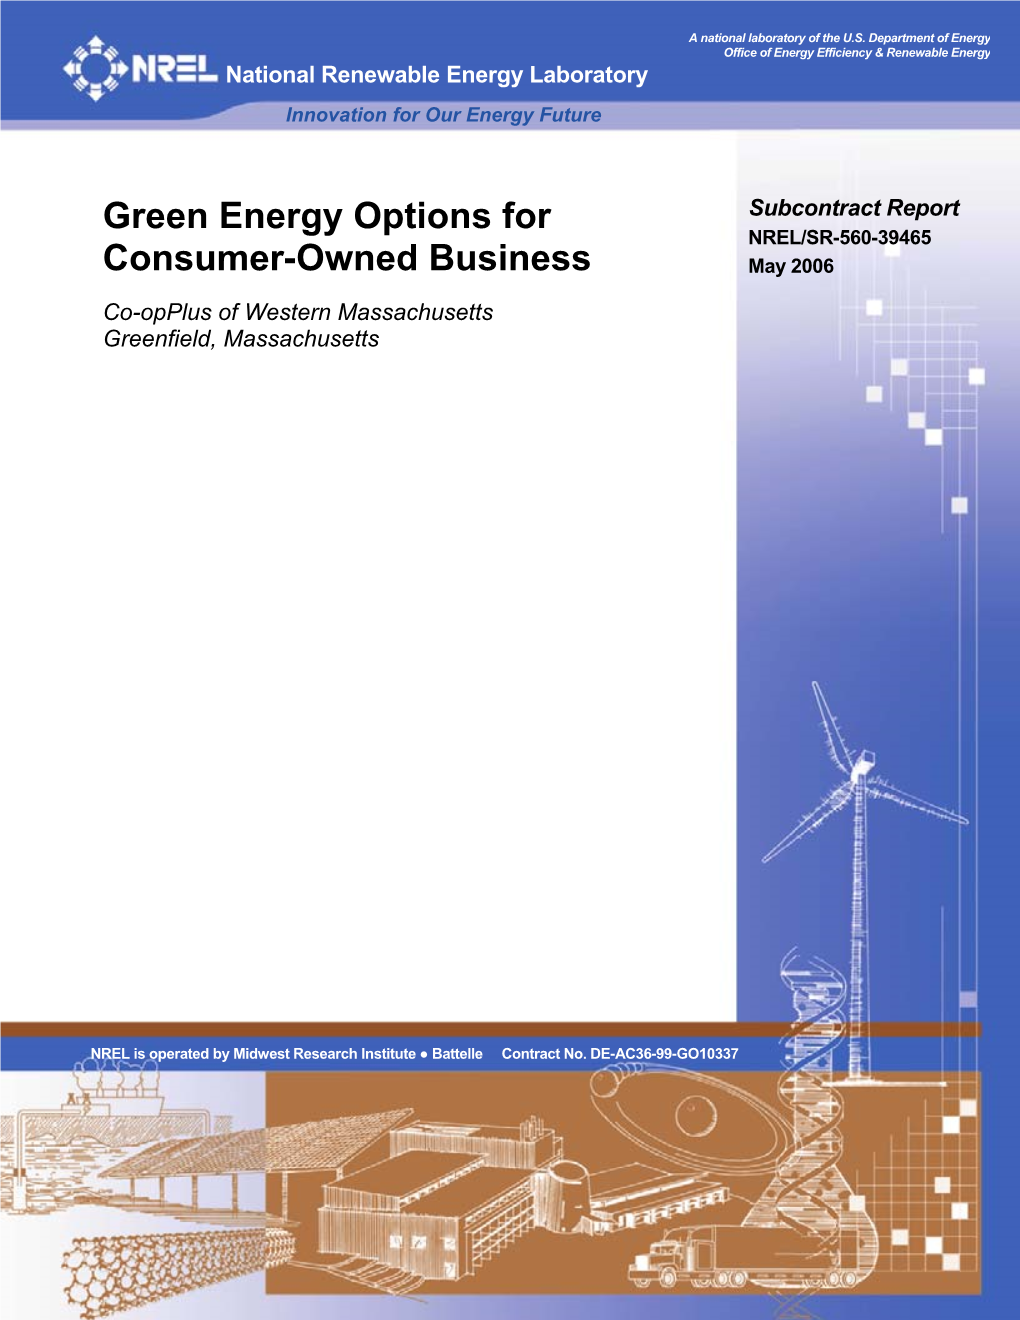 Green Energy Options for Consumer-Owned Business DE-AC36-99-GO10337